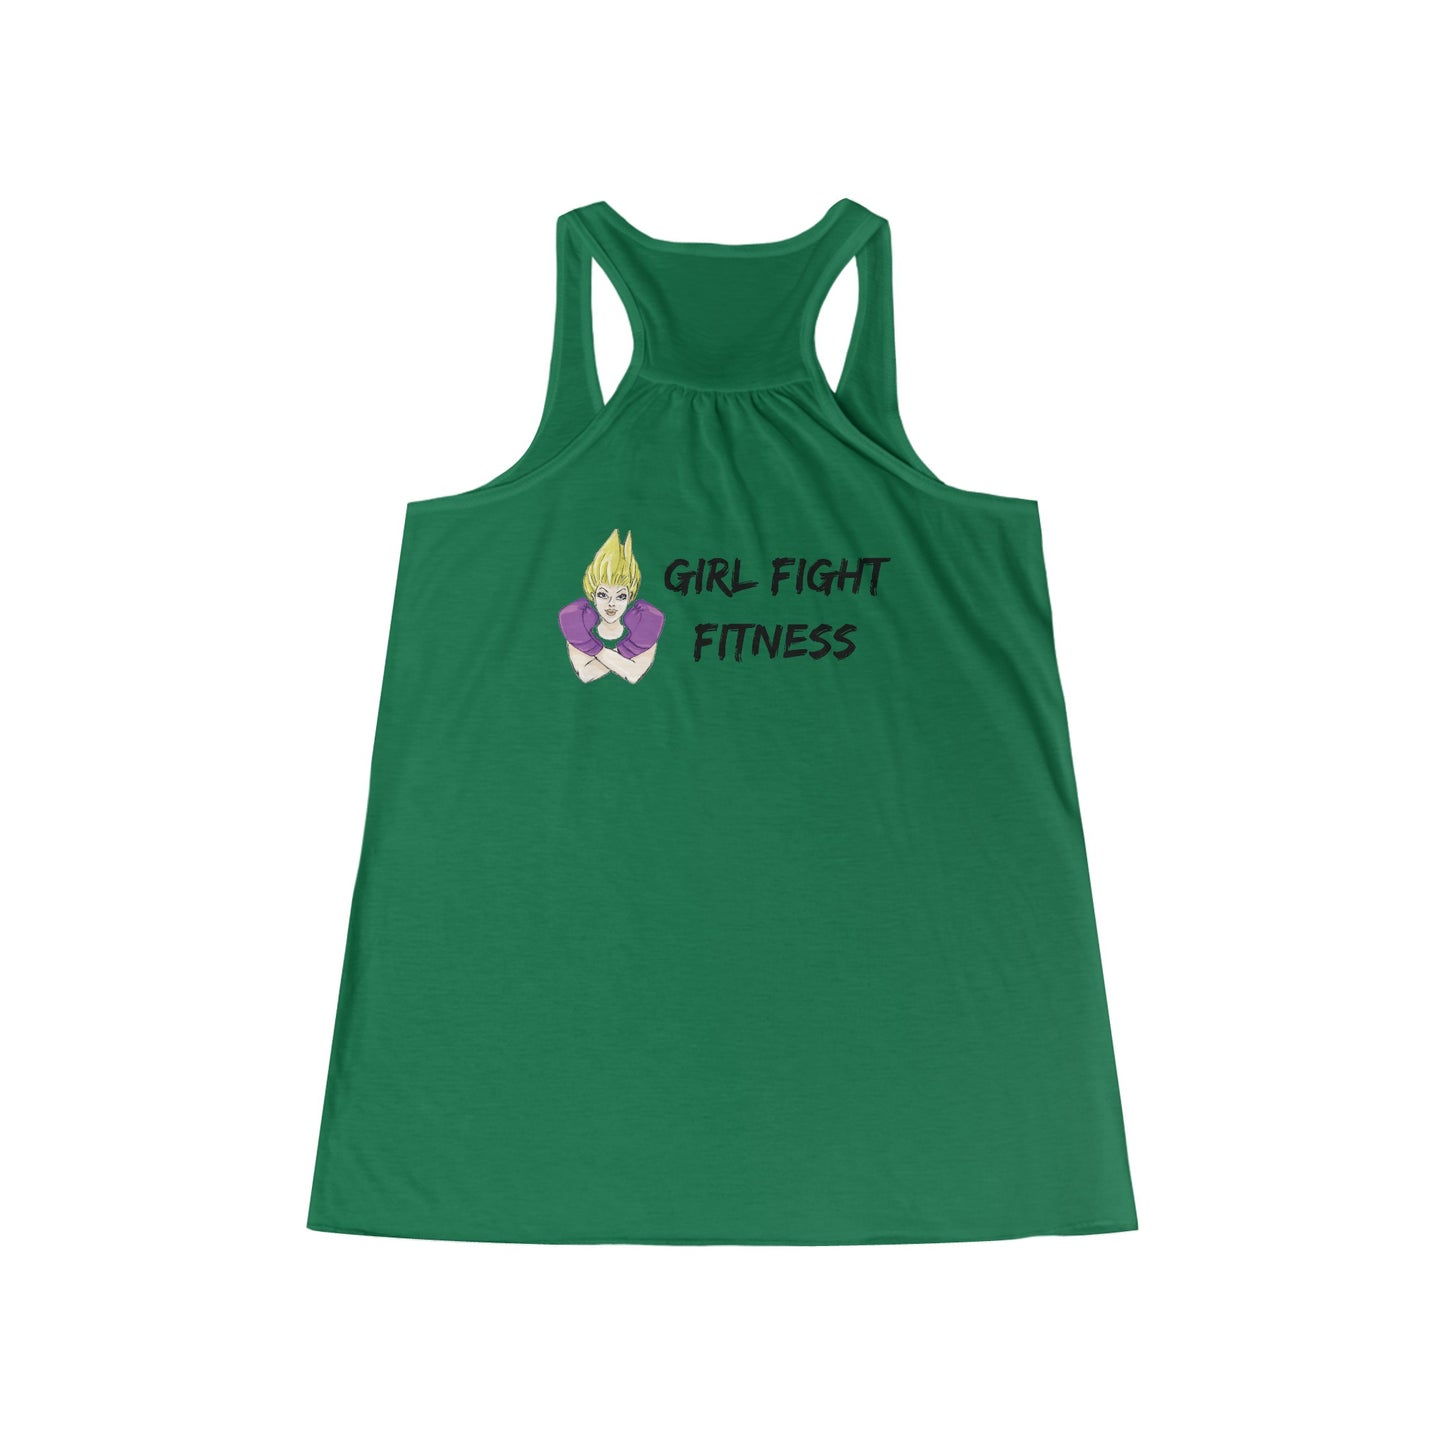 PRIDE - Come As You Are - Flowy Racerback Tank